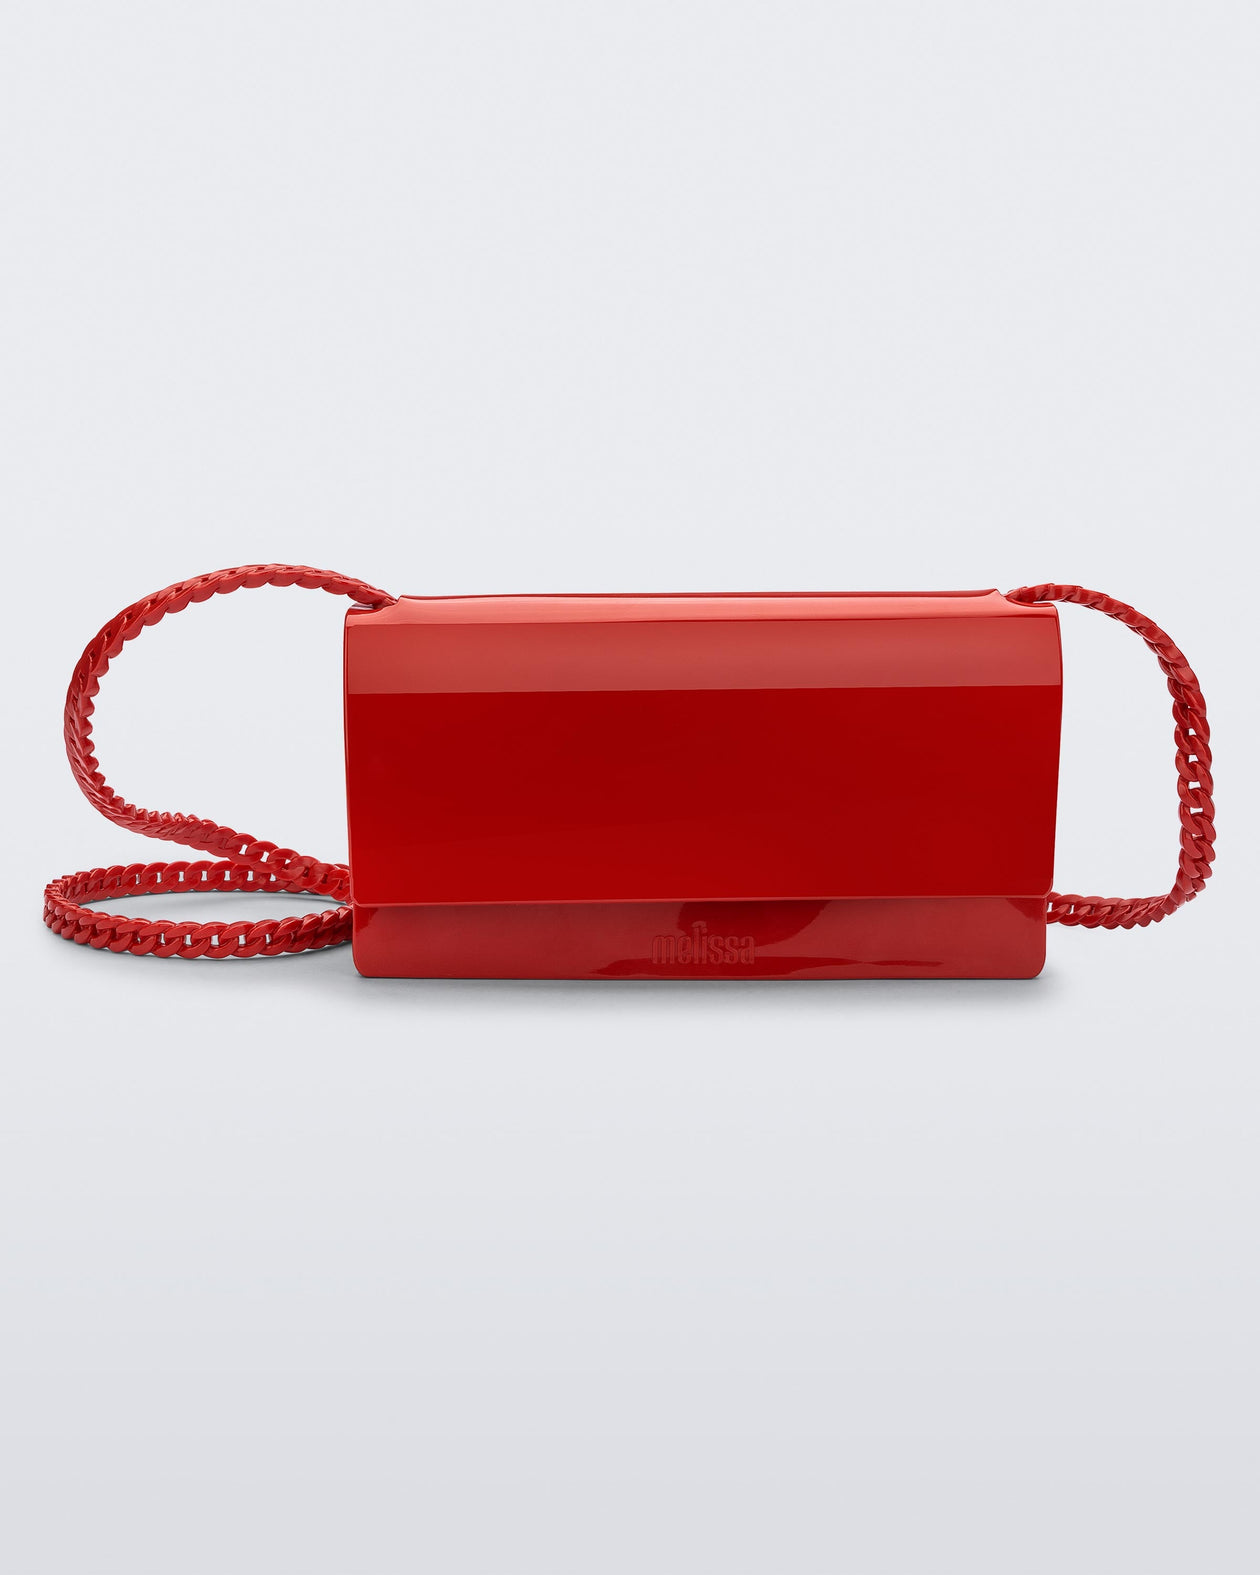 Front view of the Melissa party handbag in red with braided strap.